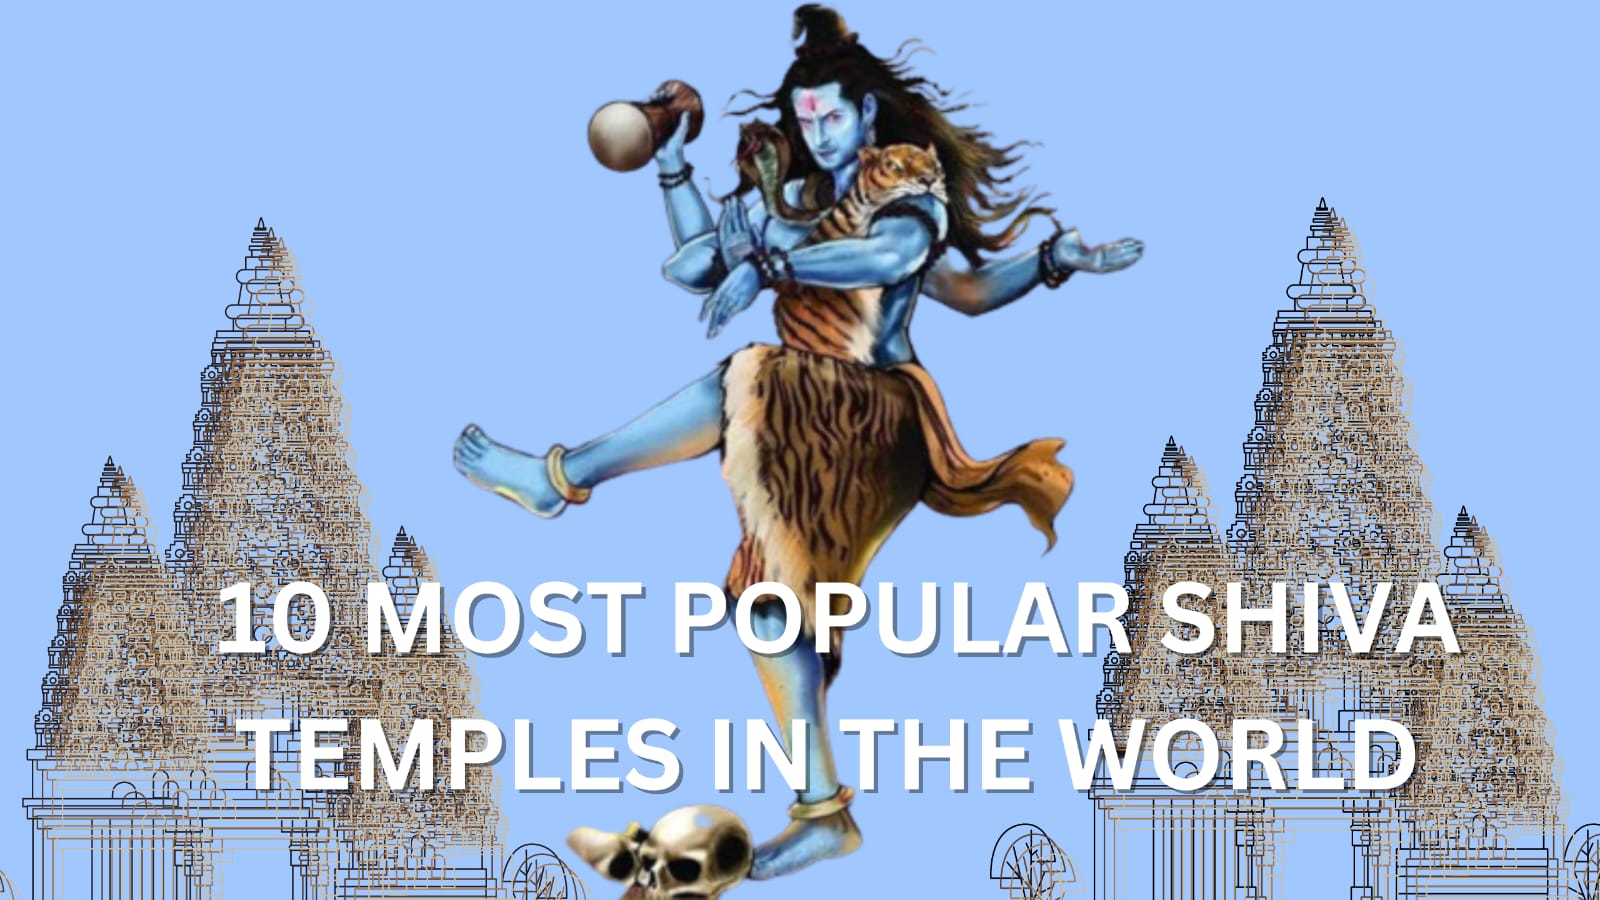 10 MOST POPULAR SHIVA TEMPLES IN THE WORLD